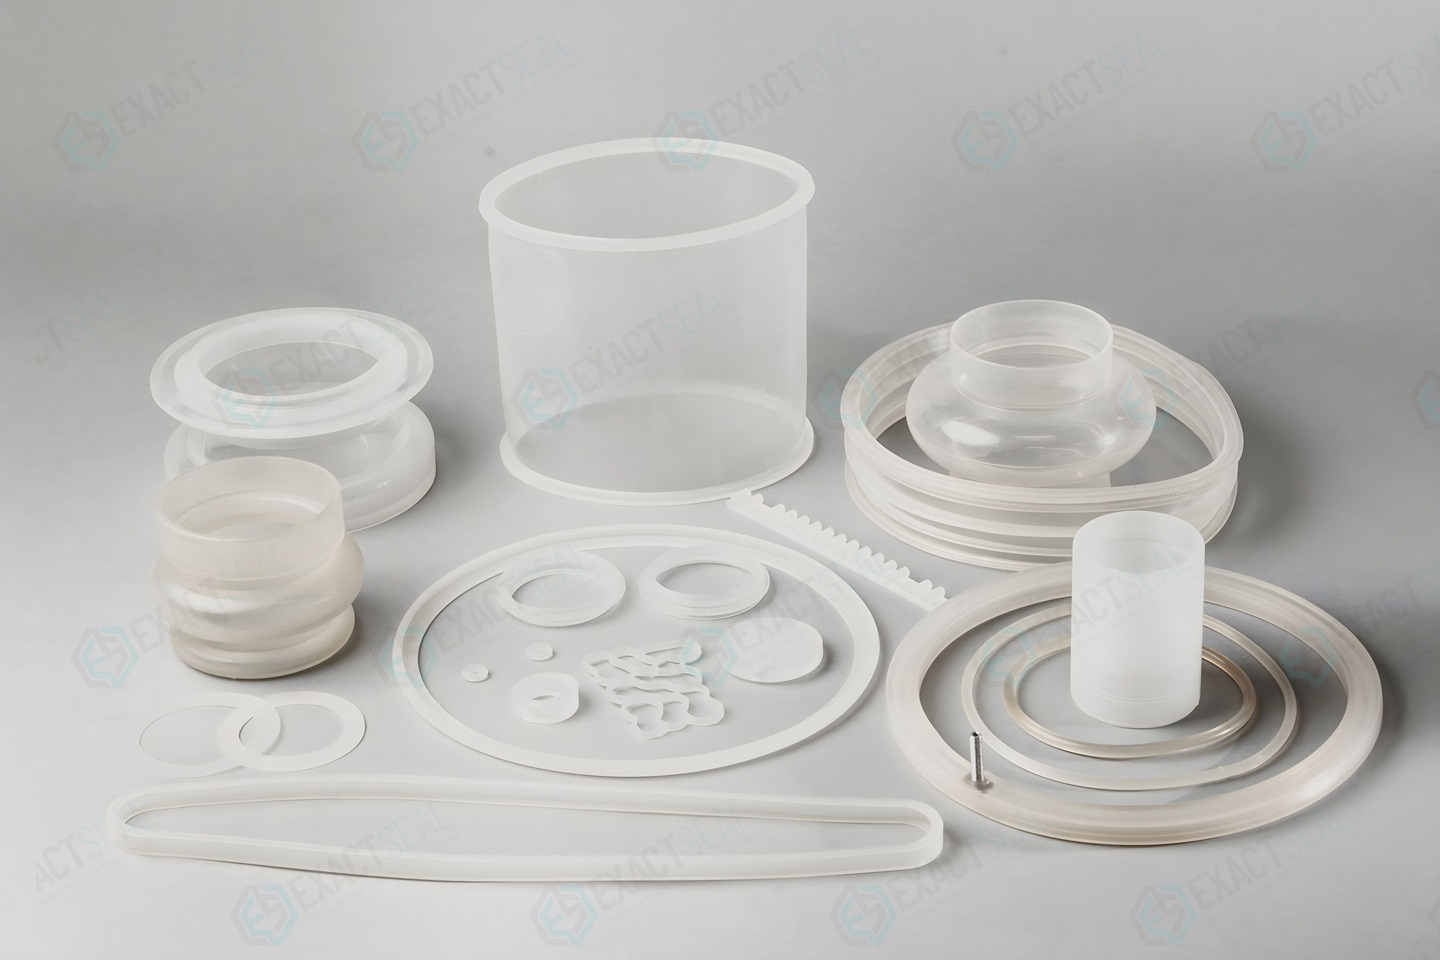 Medical Grade Silicone Rubber molded parts